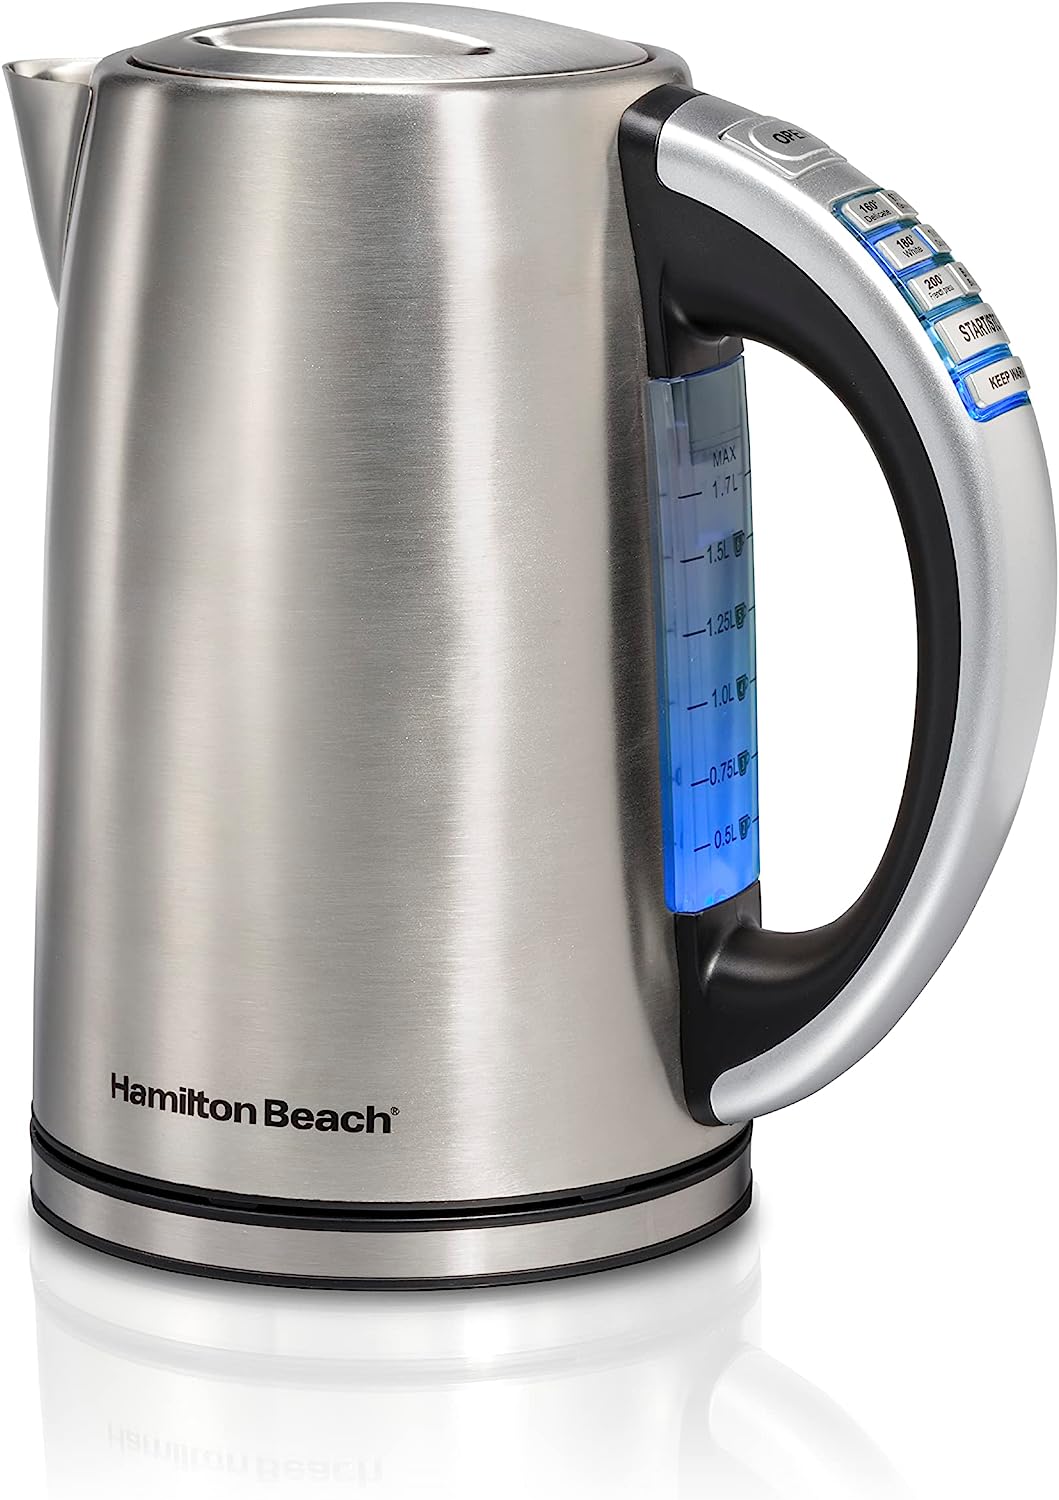 Read more about the article Hamilton Beach Temperature Control Electric Tea Kettle, Water Boiler & Heater, 1.7 Liter for ONLY $39.99 (Was $49.99)